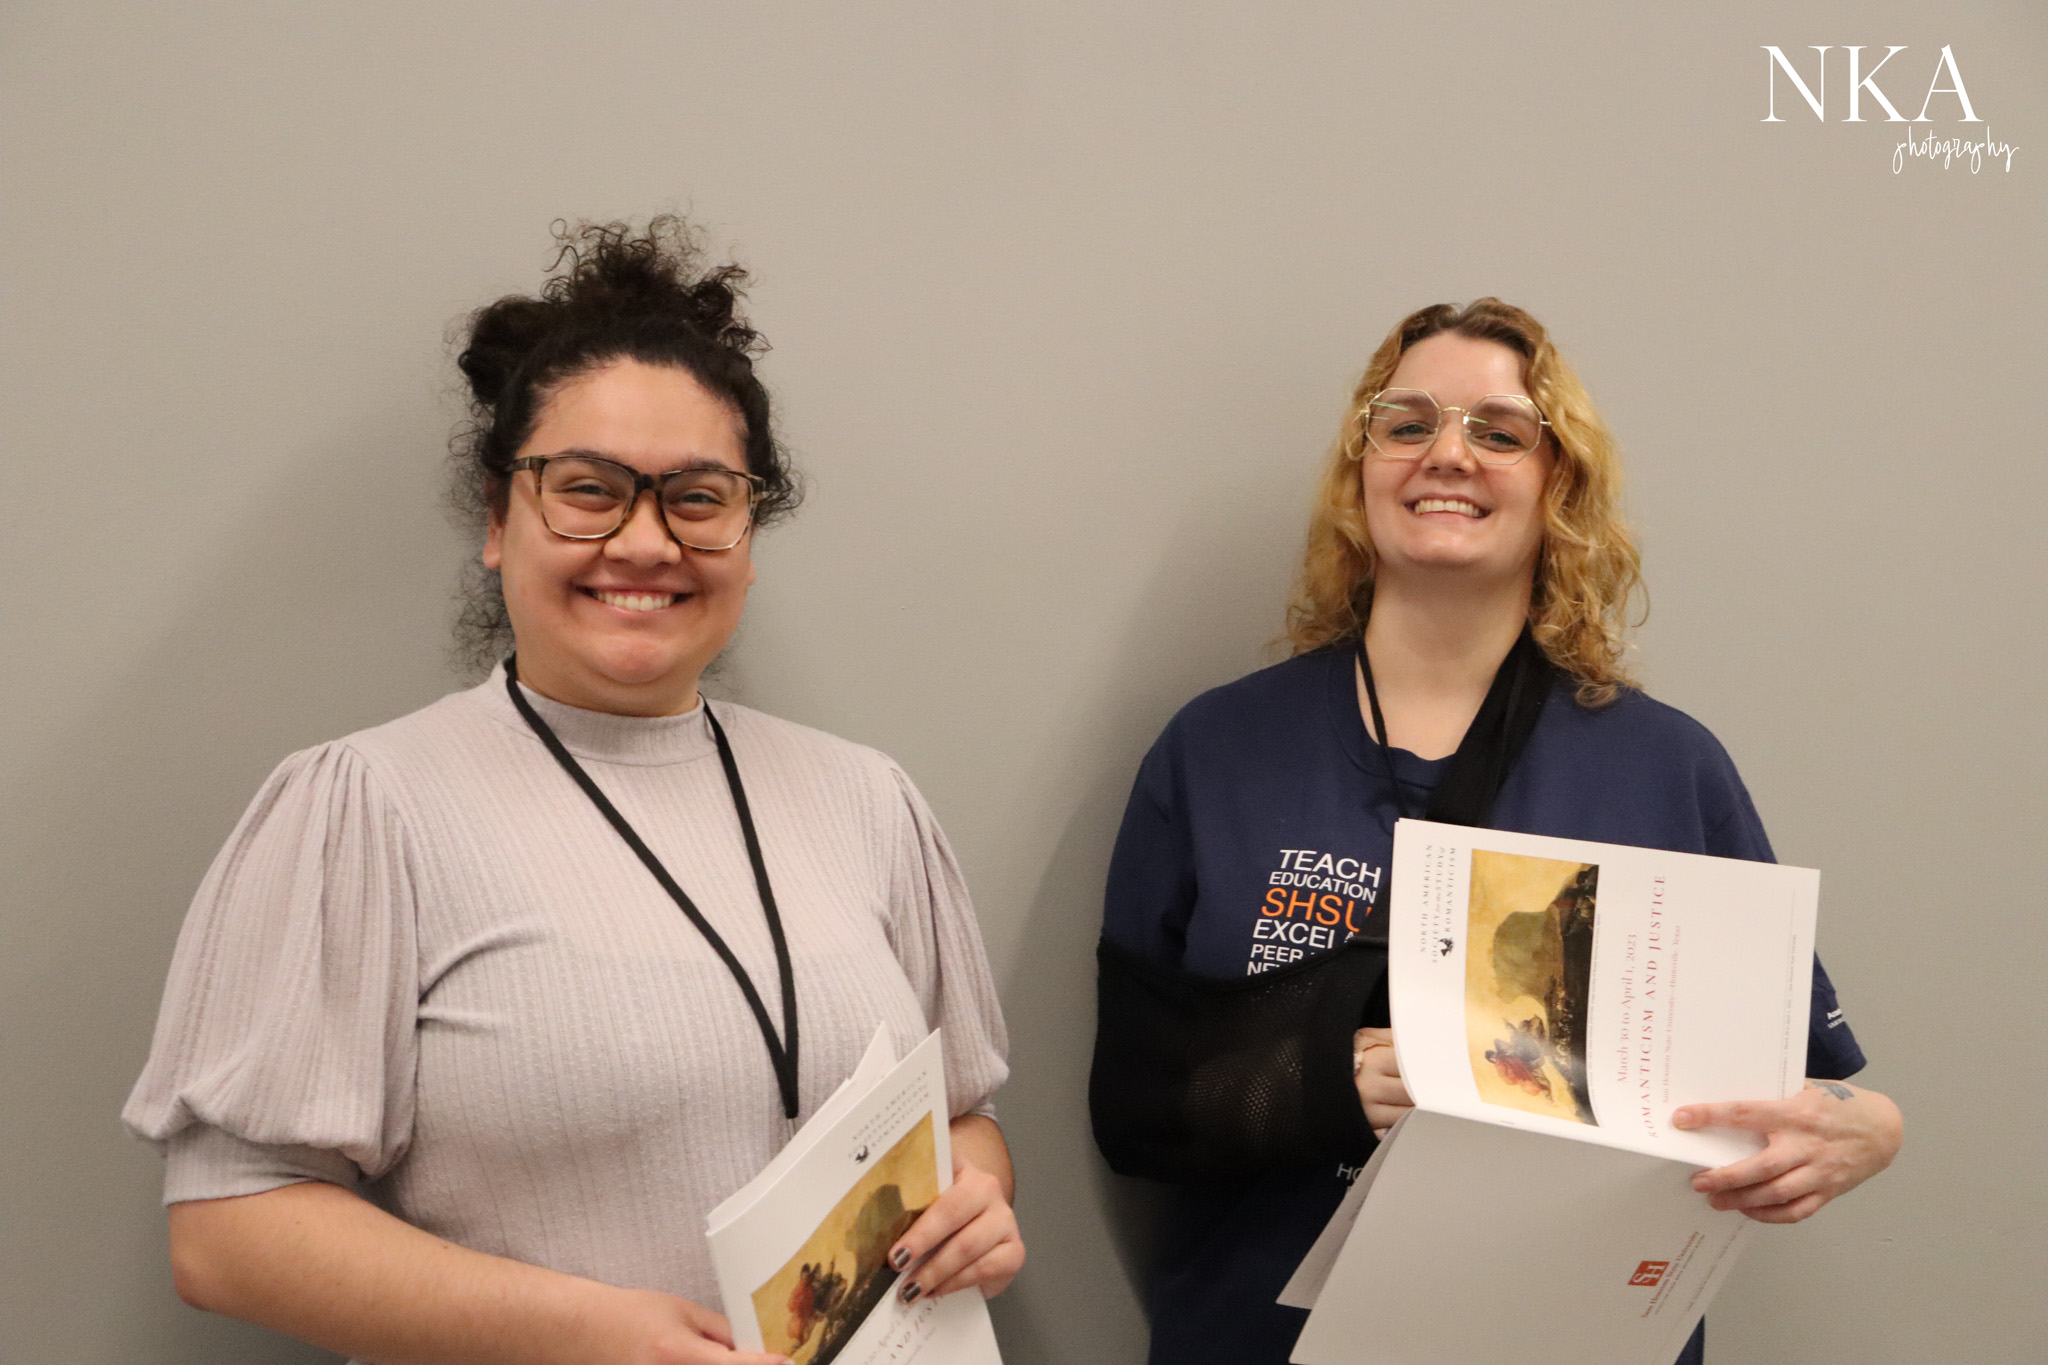 Two students smiling and holding programs at conference.